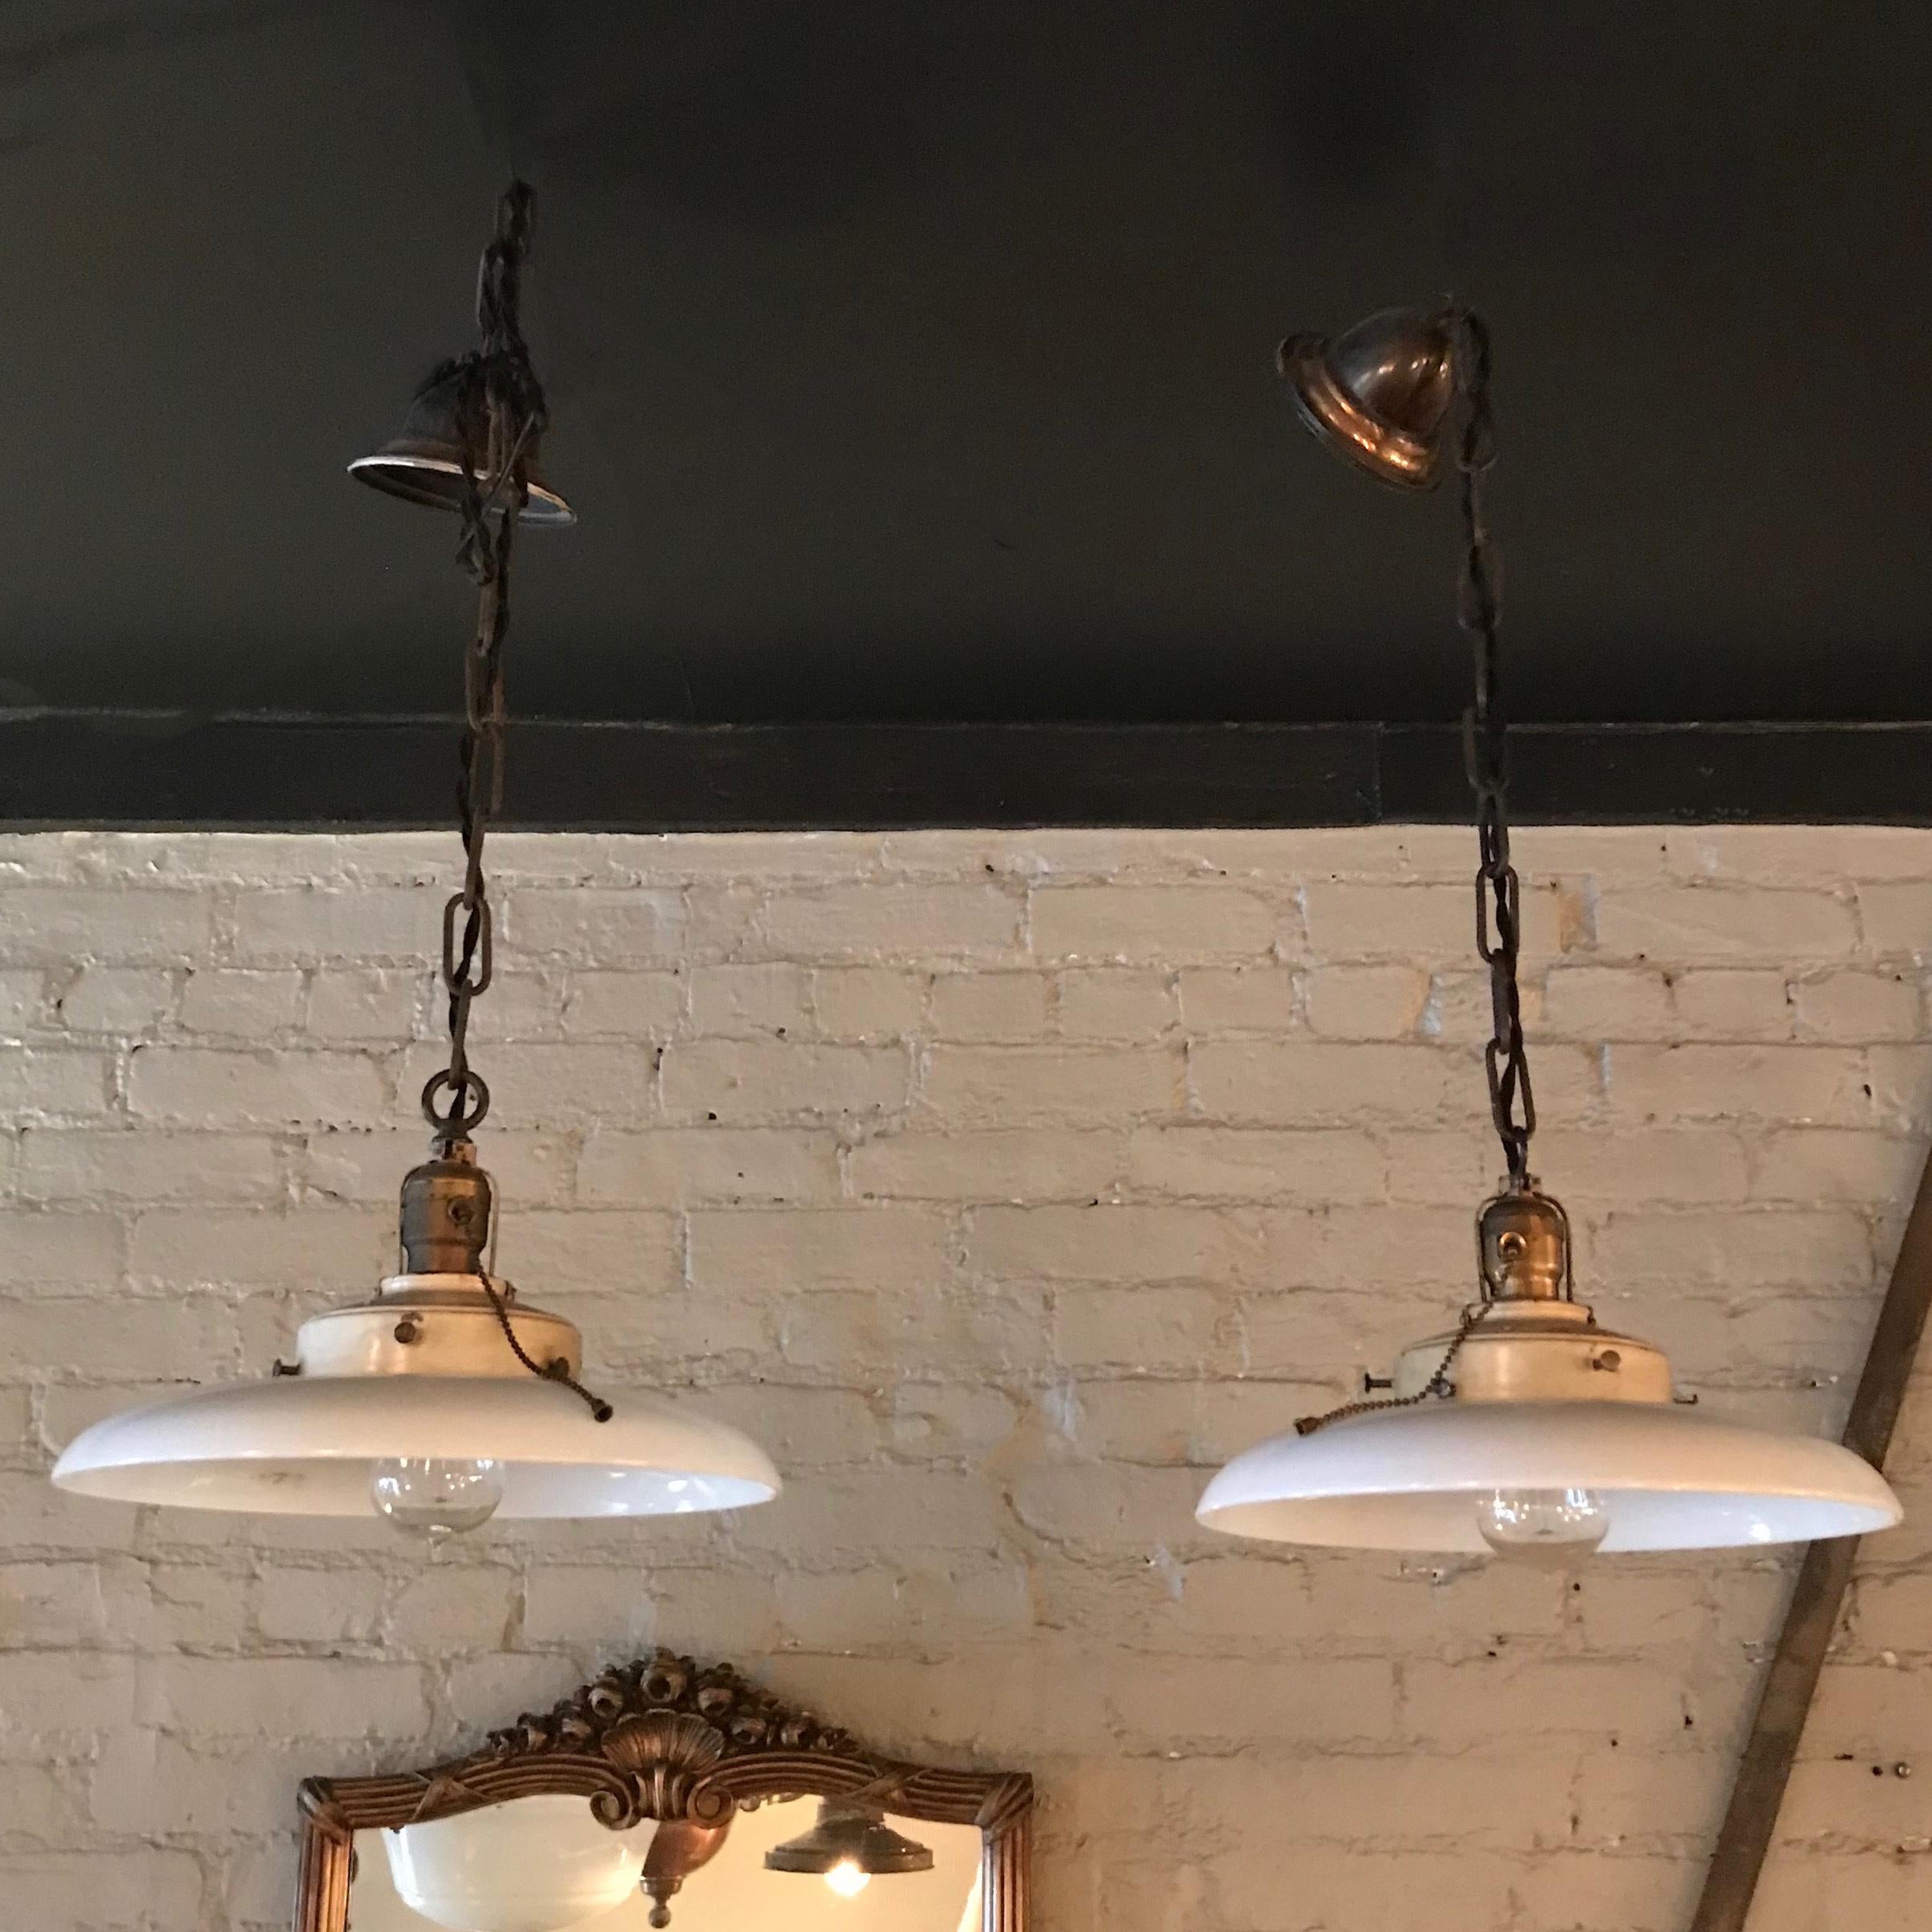 Pair of industrial, factory pendant lights feature curved milk glass disc shades with baked enamel steel fitters on brass pull-chain sockets, brass chain, finished with brass canopies for the ceiling. The pendants are newly wired with braided black